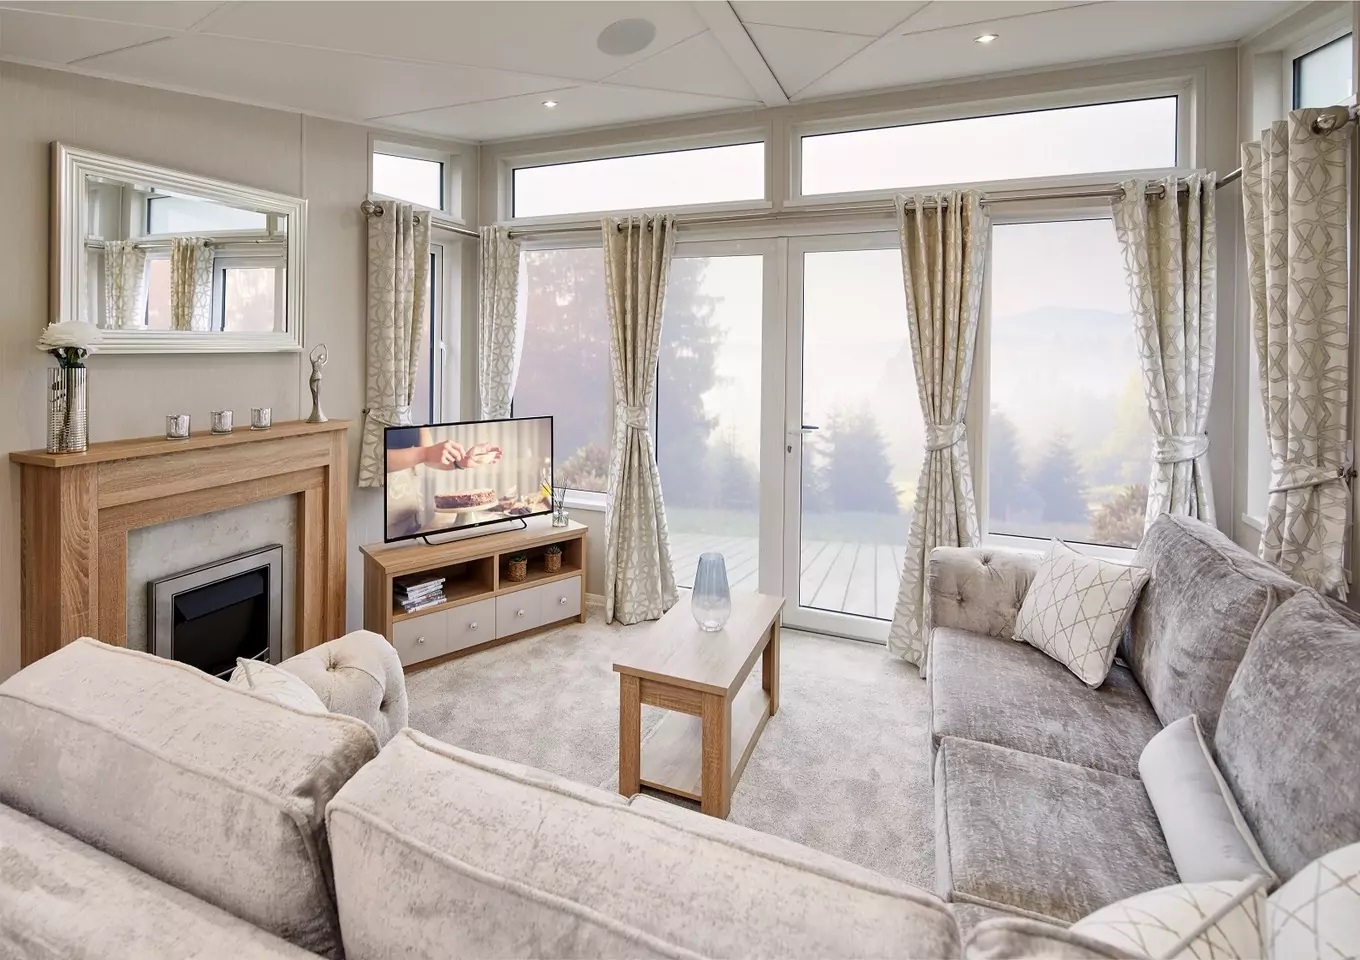 Image 3 of willerby-vogue-samphire-cove-full-package-price-including-2023-site-fees-rates